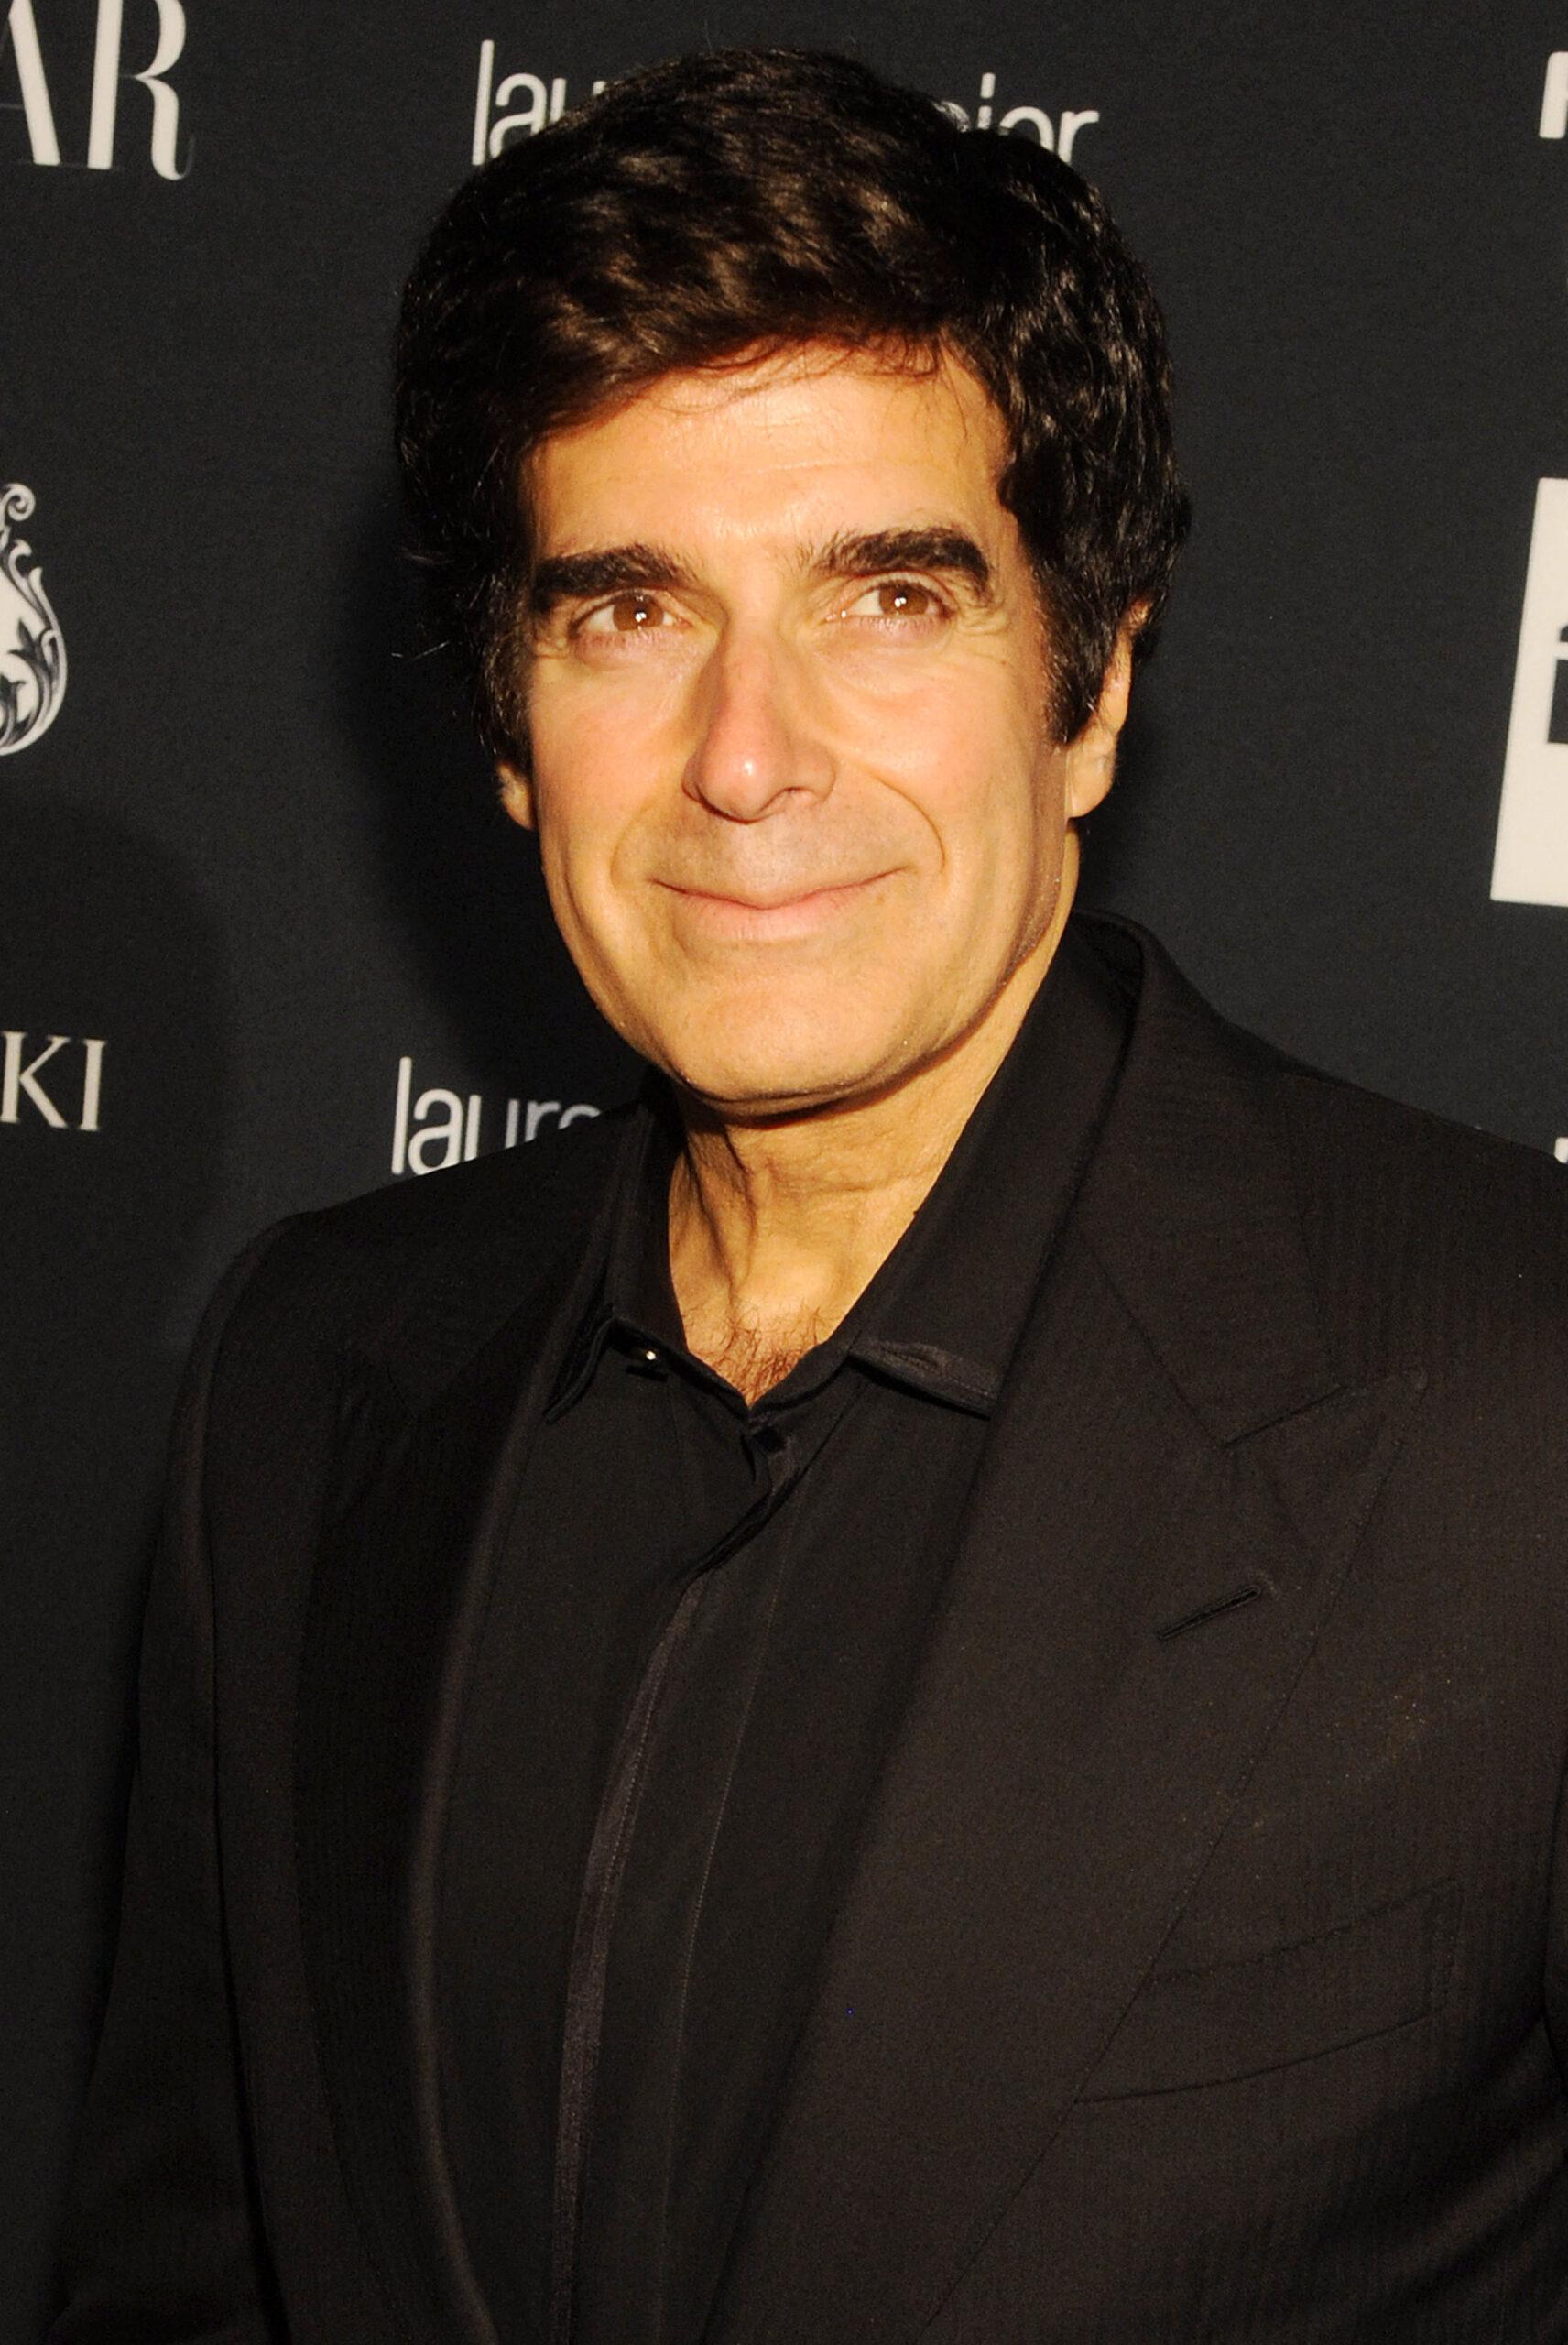 David Copperfield, Michael Jackson Among Big Names Named In Jeffrey Epstein's List